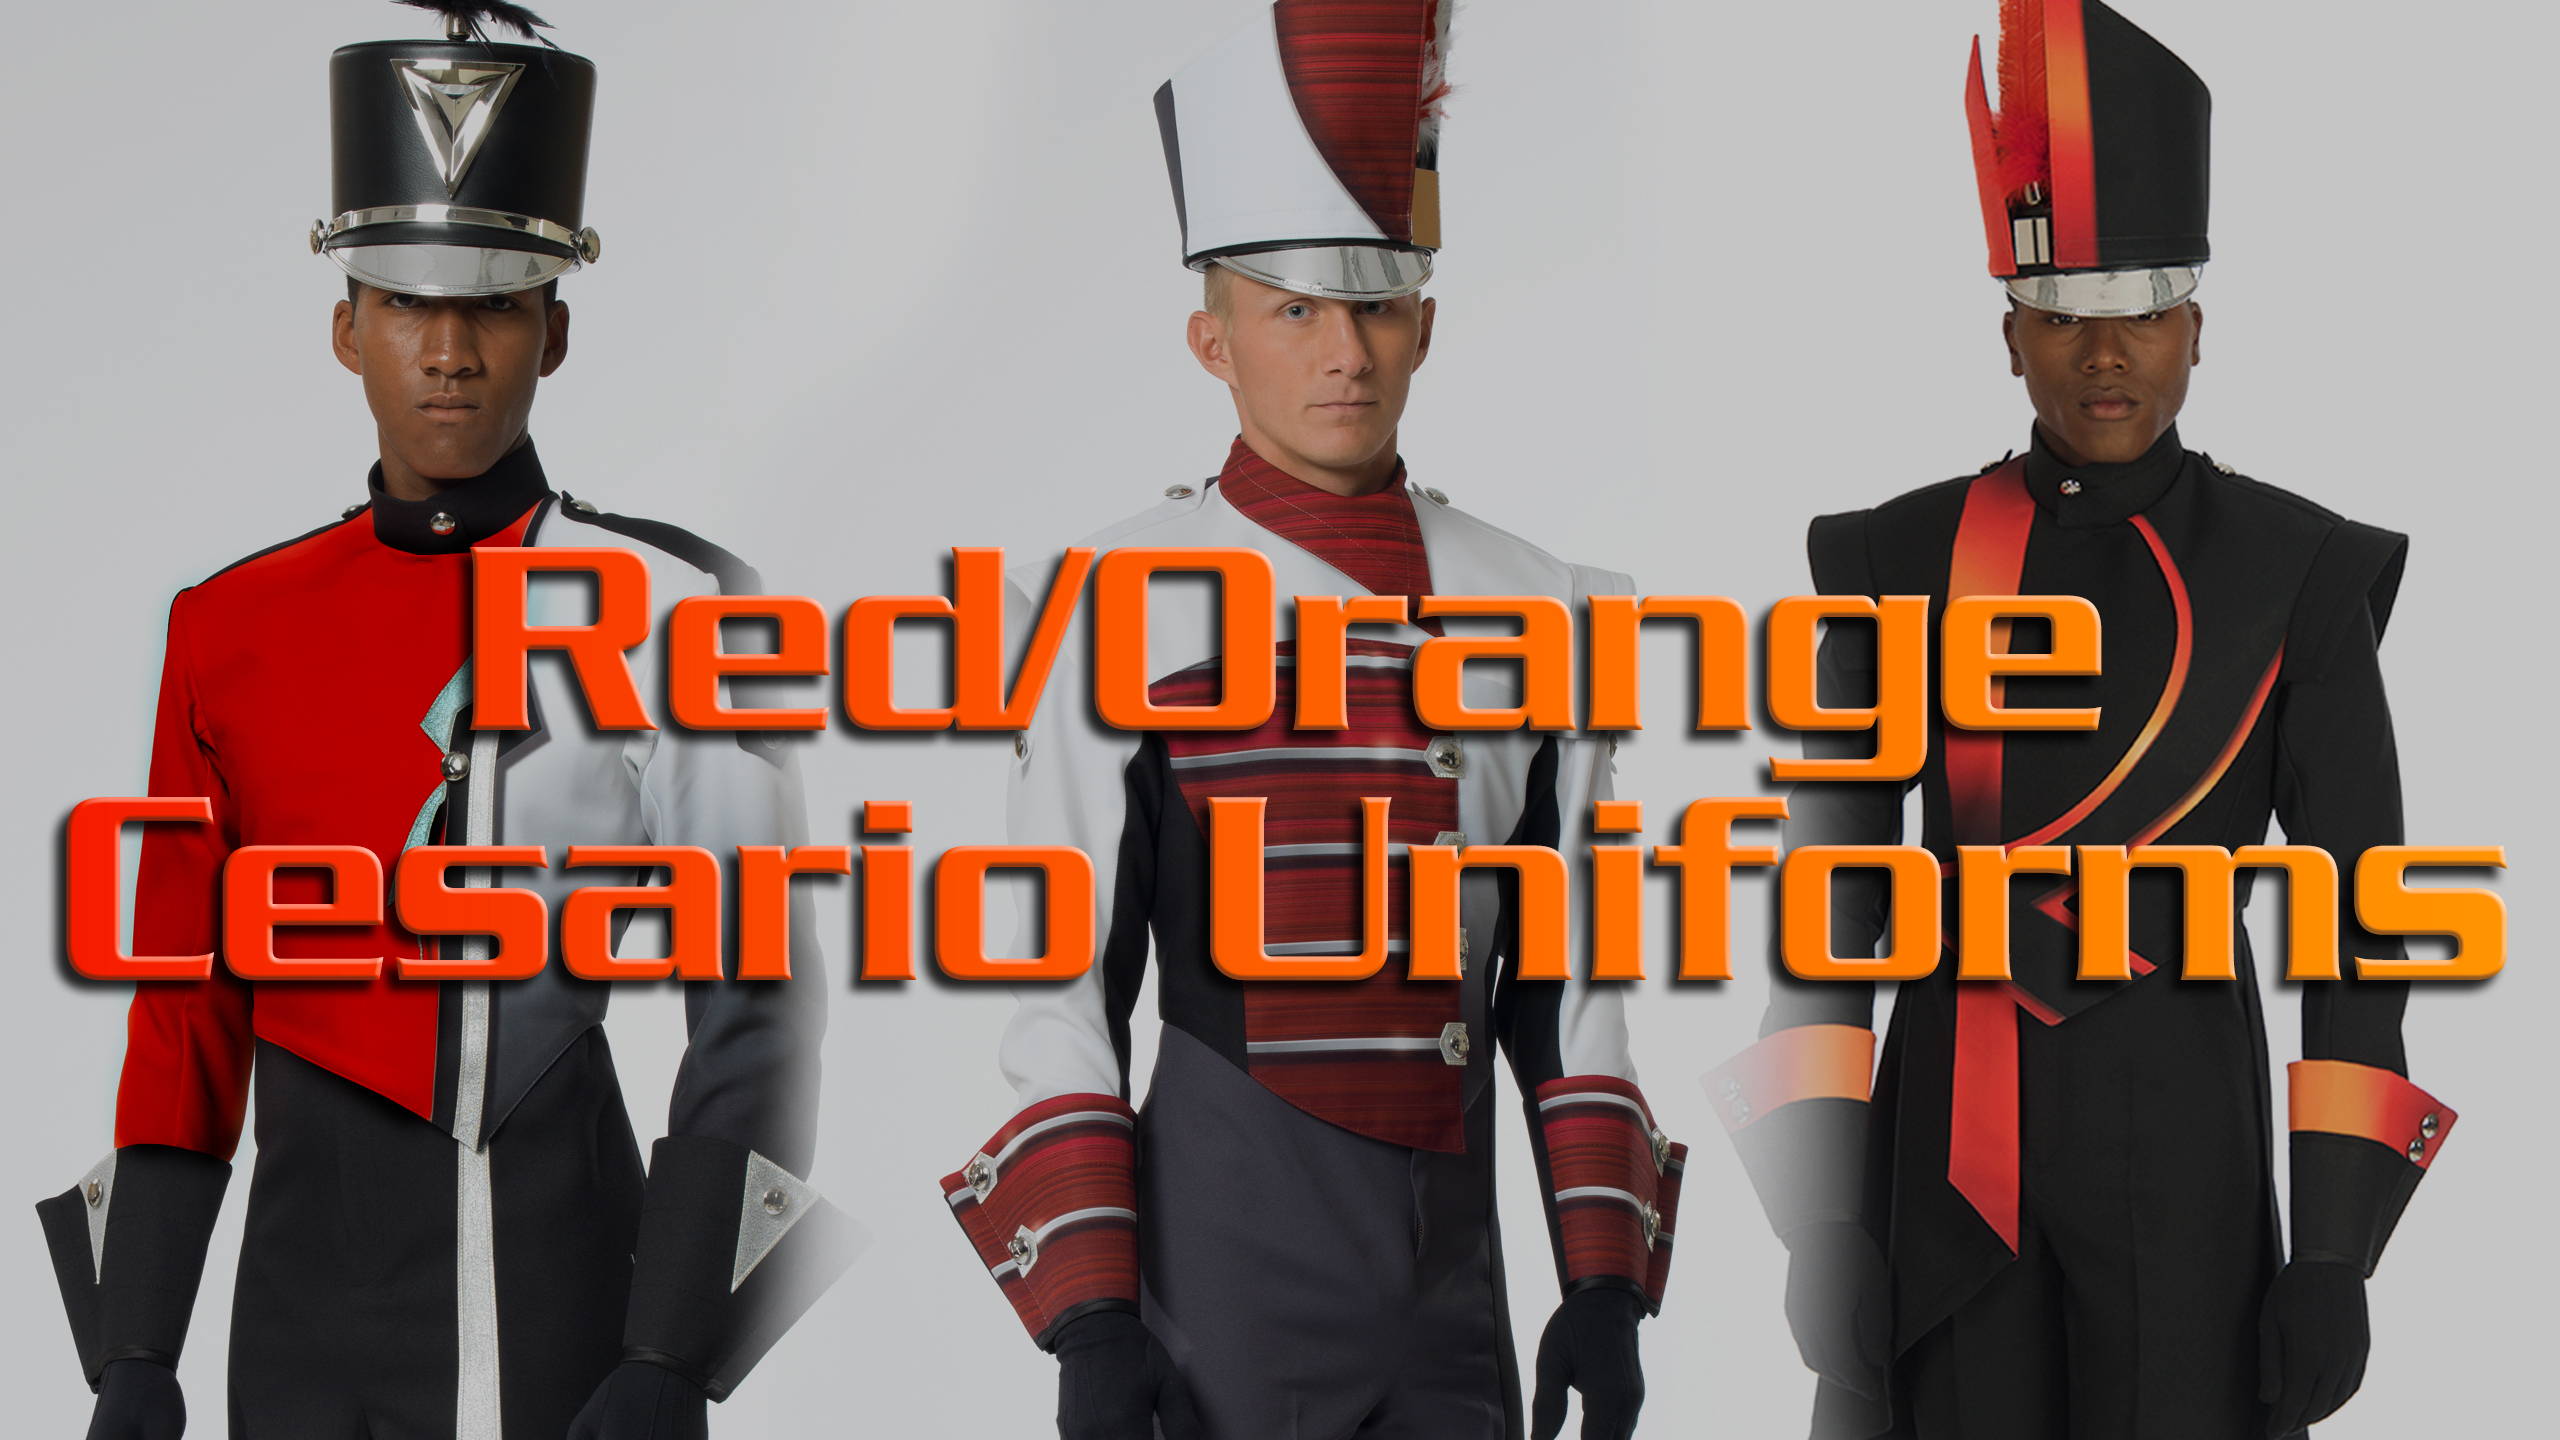 Red Cesario Marching Band Uniforms – Fred J. Miller Inc.